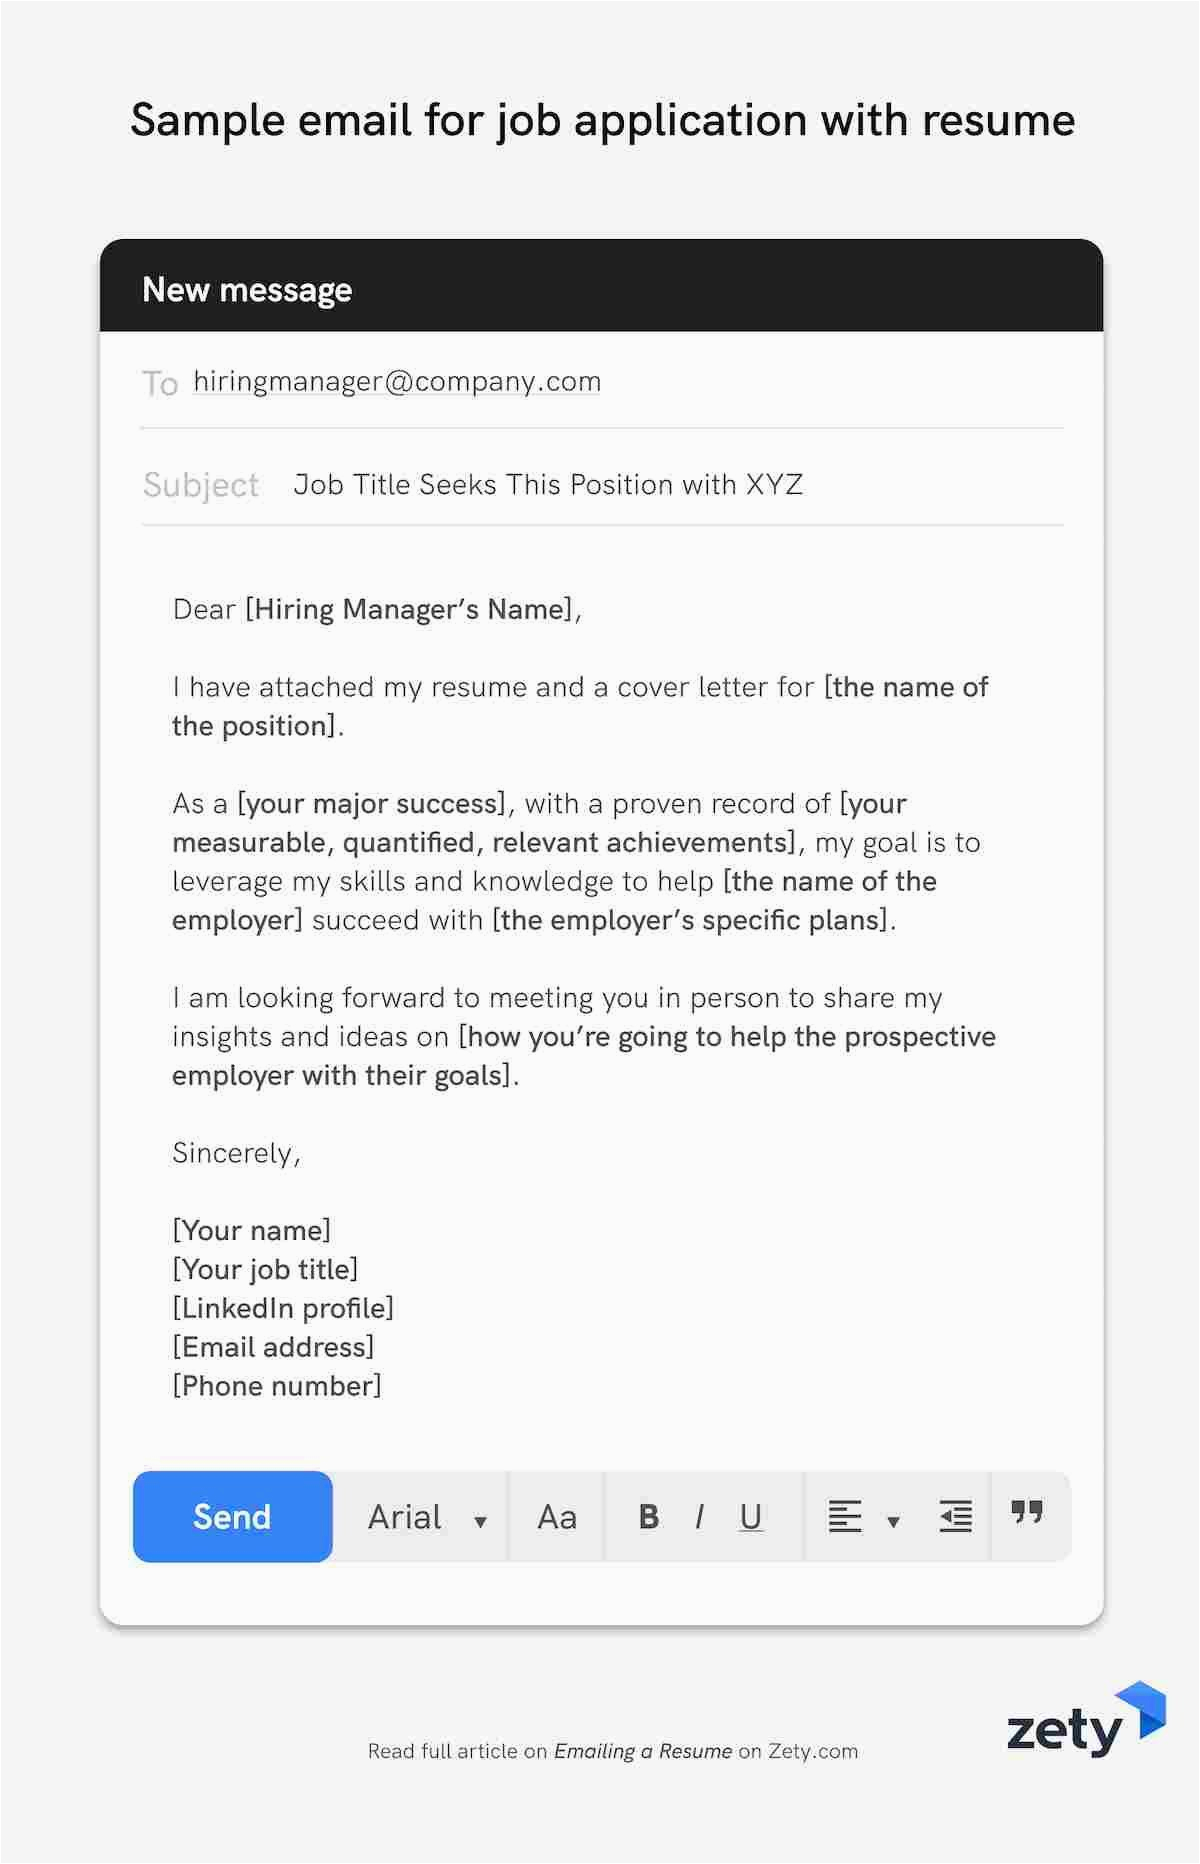 Sample Email Template for Sending Resume Emailing A Resume 12 Job Application Email Samples